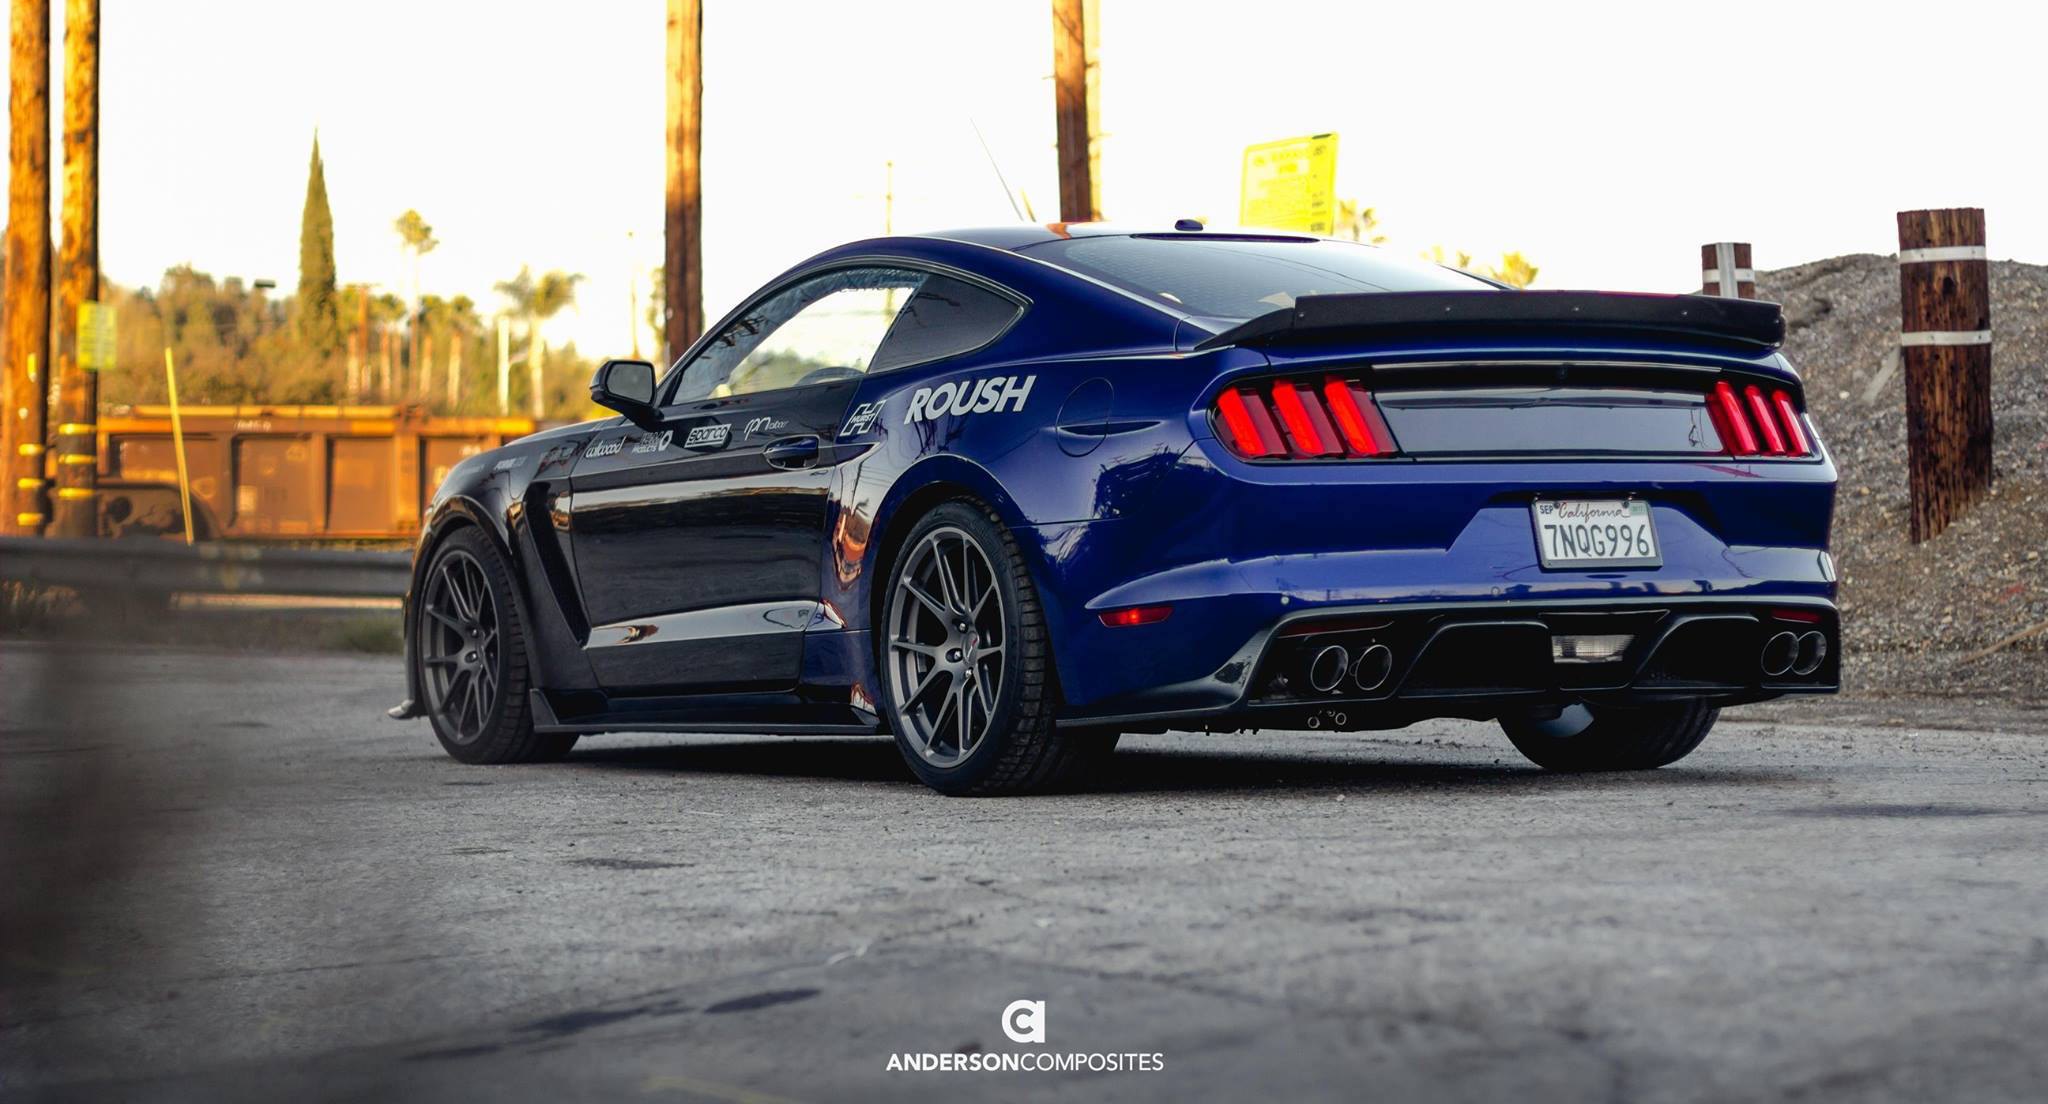 Aftermarket Rear Diffuser on Blue Debadged Ford Mustang - Photo by Forgeline Motorsports